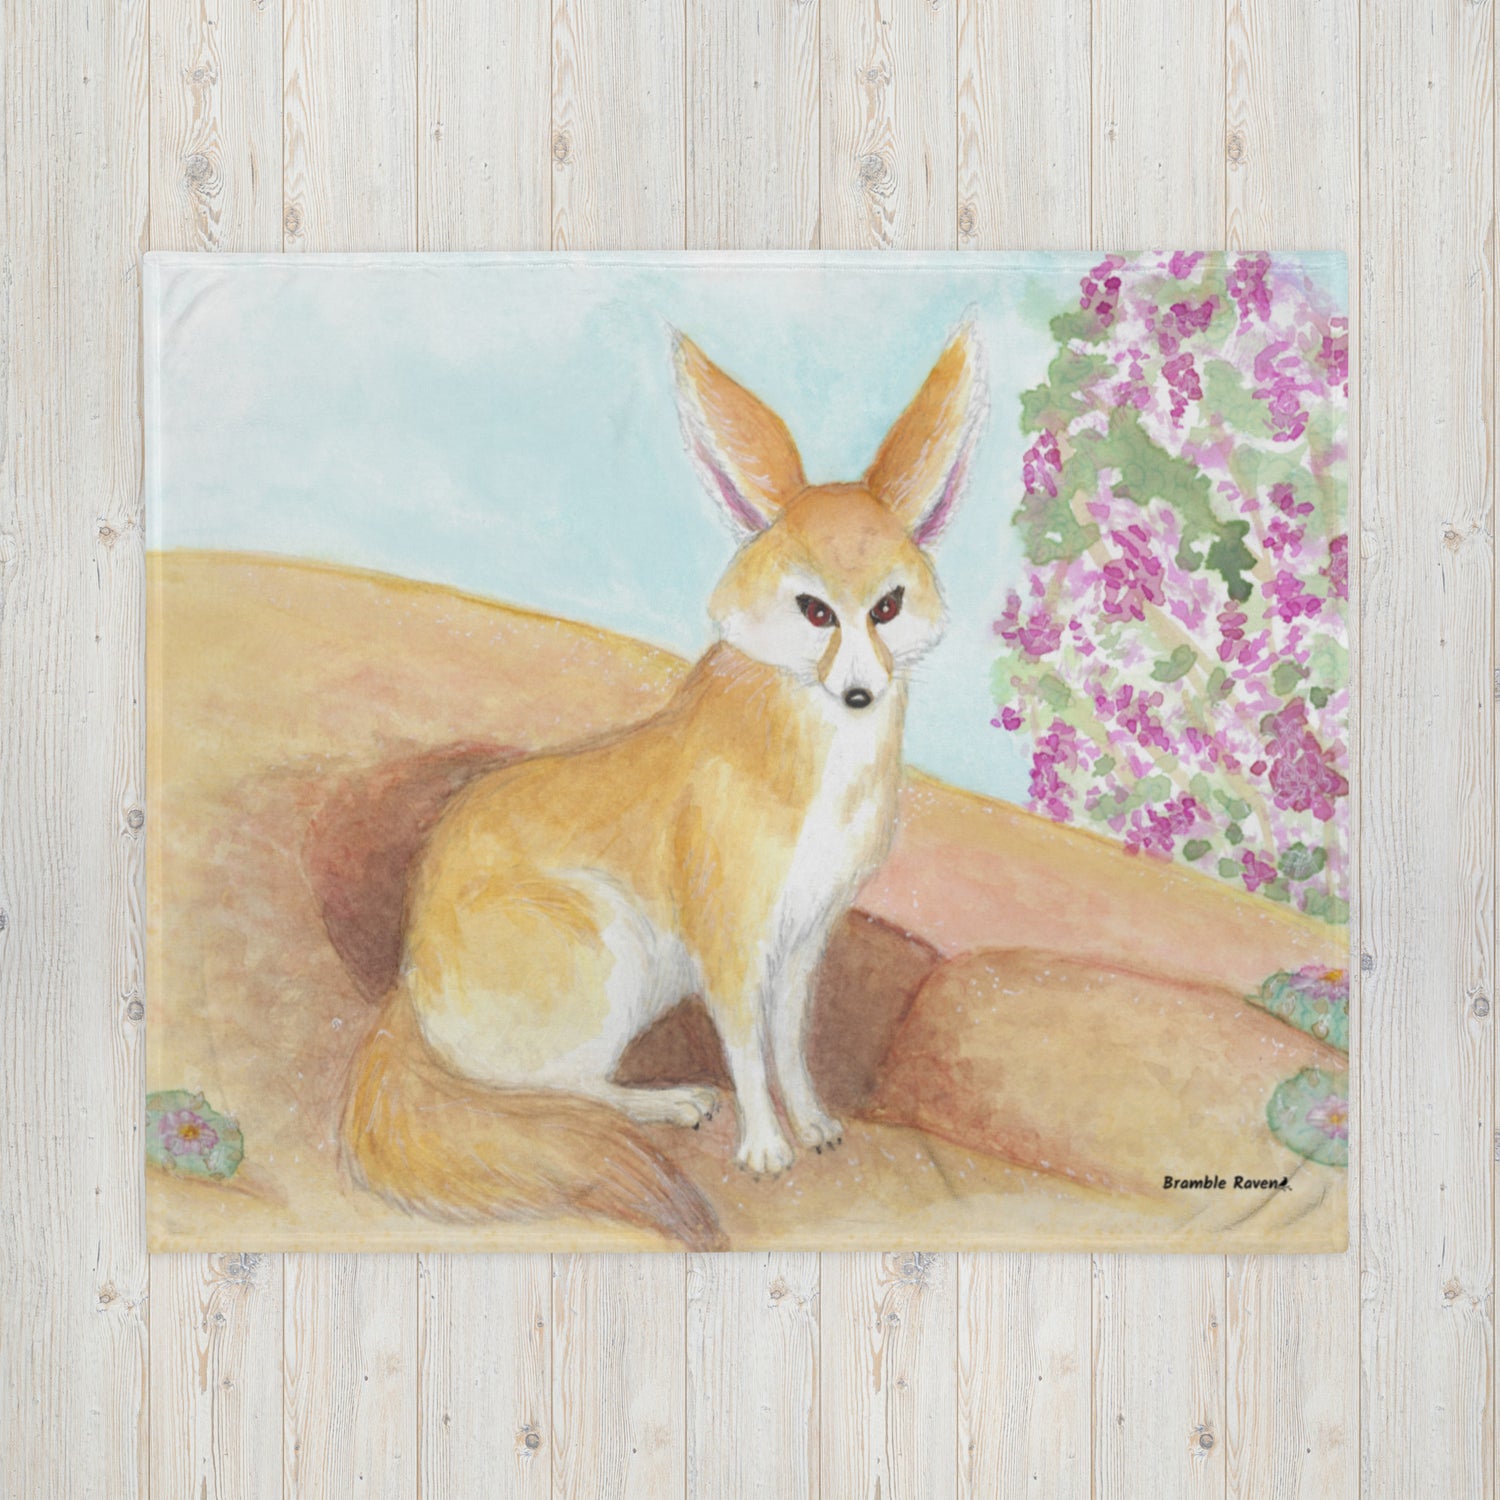 50 by 60 inch throw blanket featuring an original watercolor painting of a fennec fox in the desert.